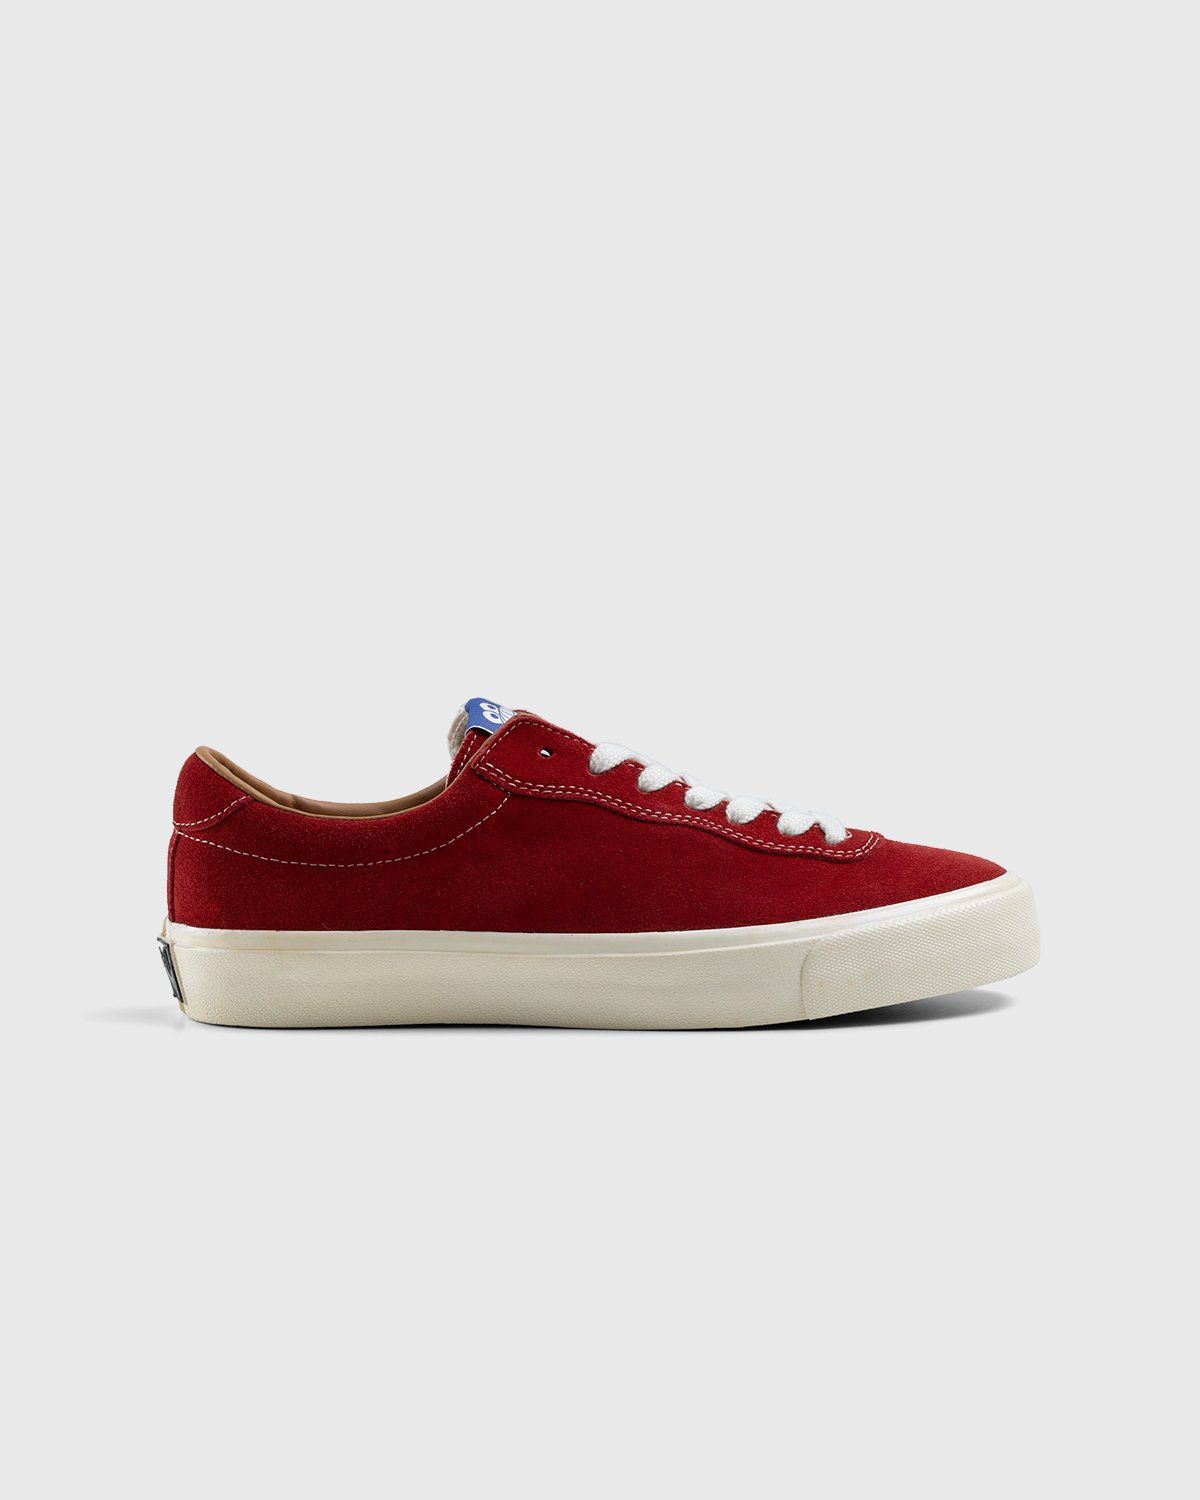 Last Resort AB – VM001 Lo Suede Old Red/White - Low Top Sneakers - Red - Image 1